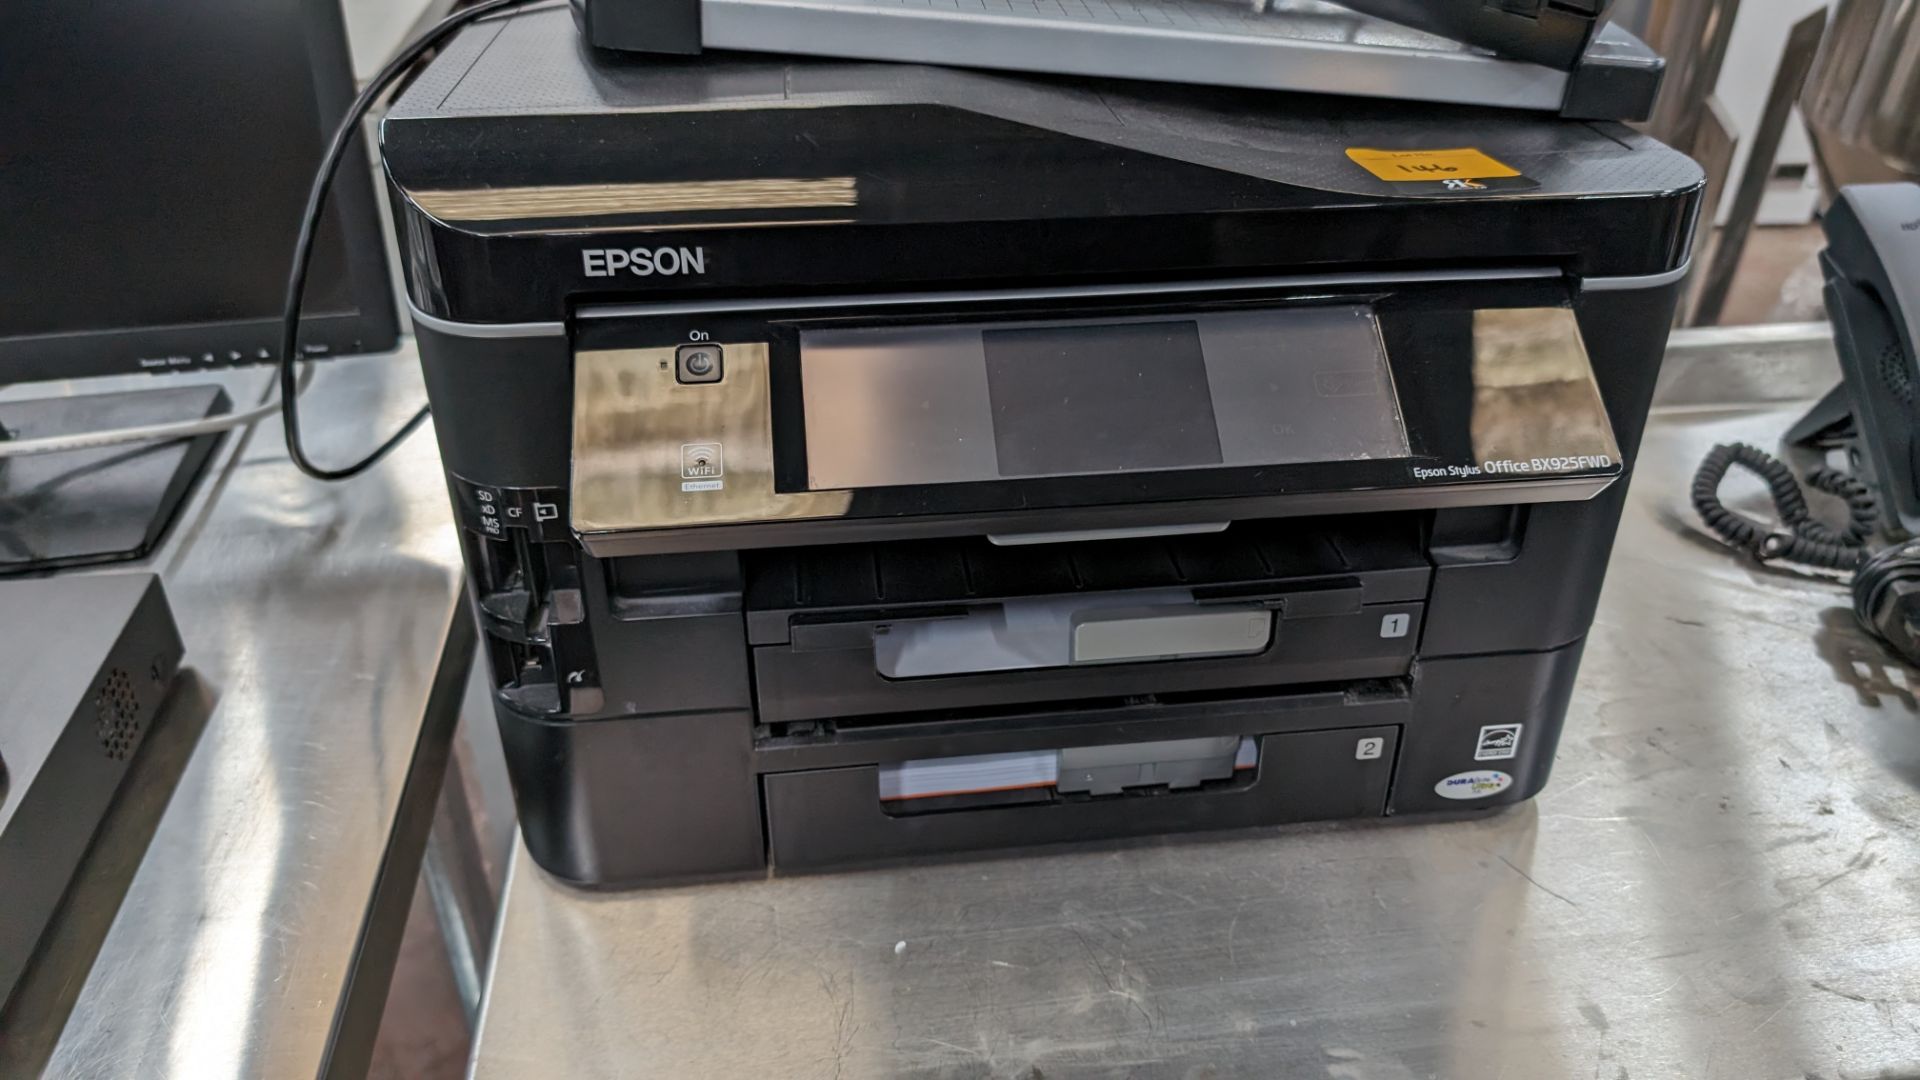 Epson Stylus Office multi-function printer, model BX925FWD, including 2 off paper cassettes, plus of - Image 3 of 6